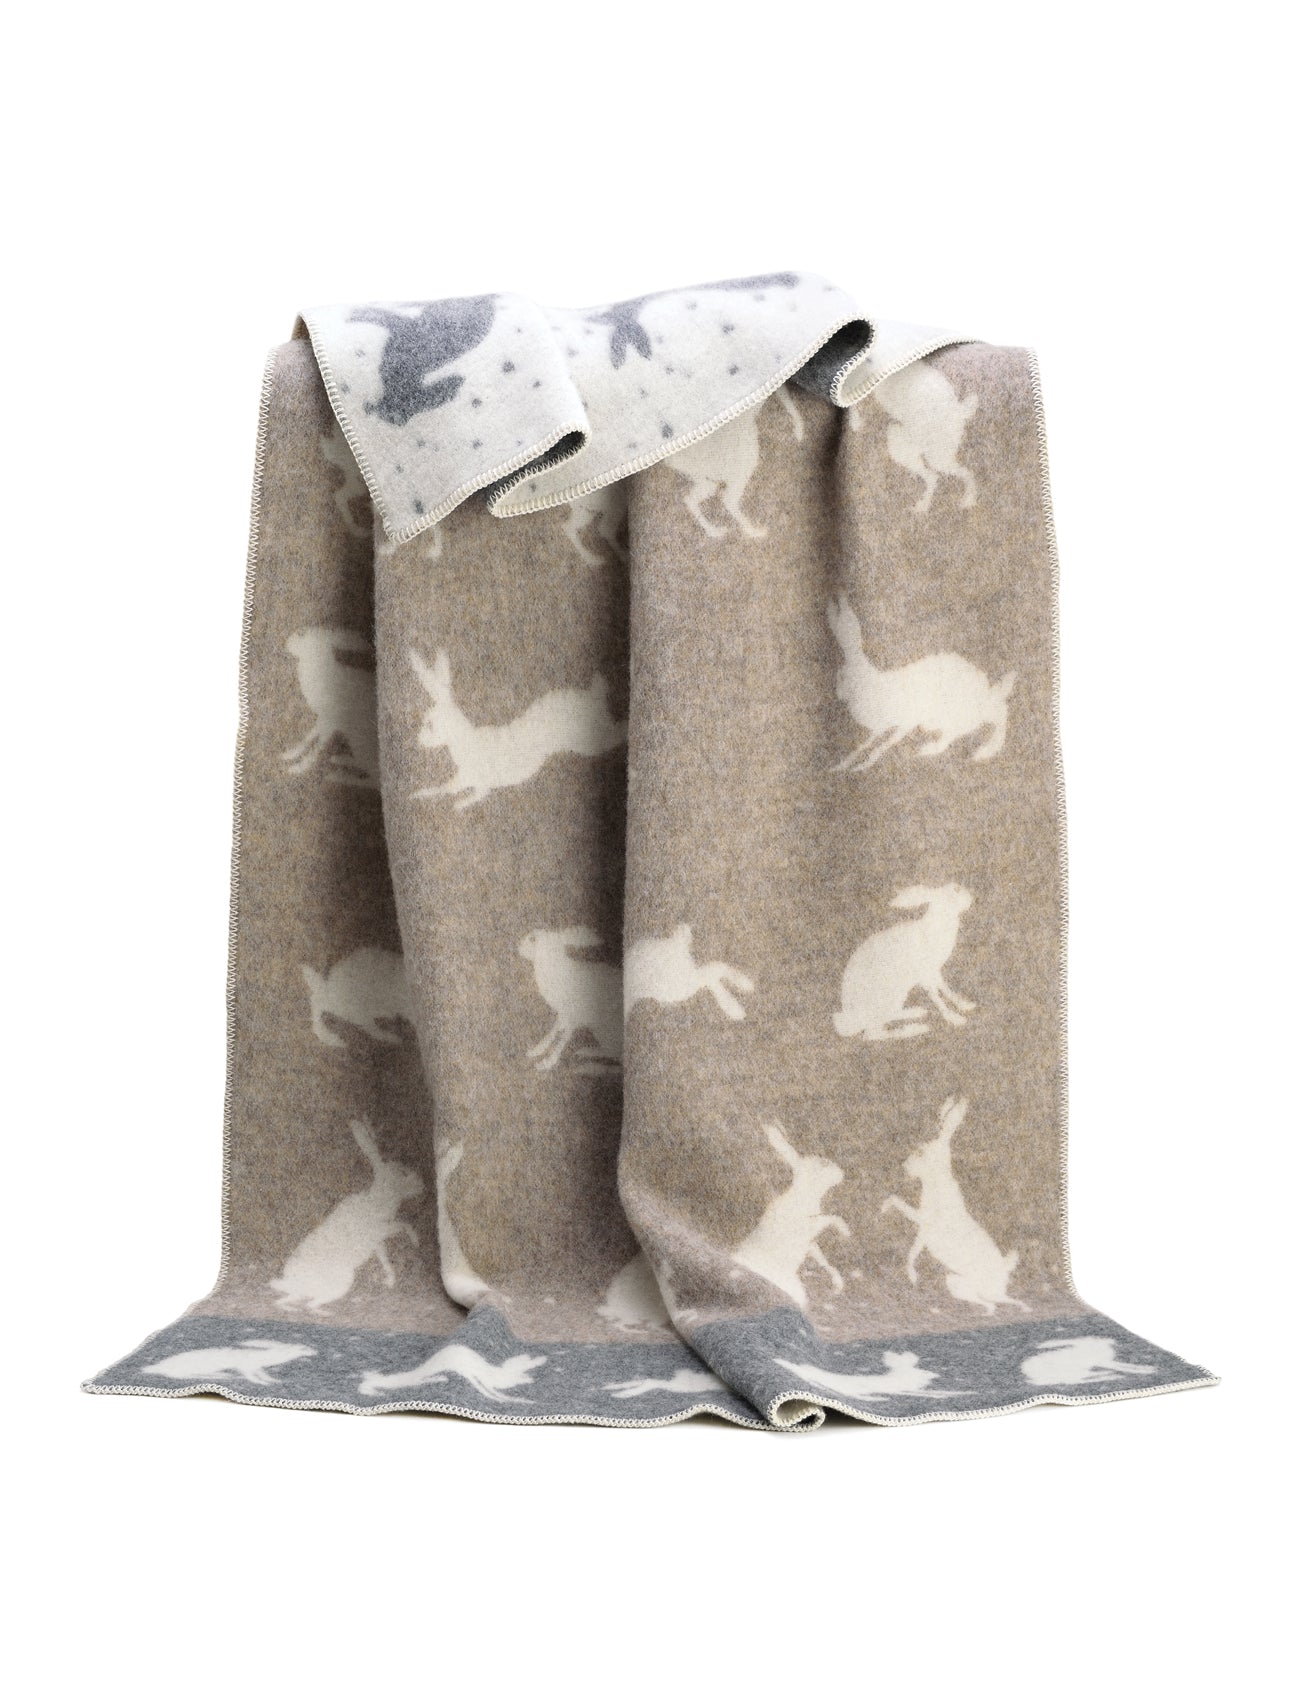 Boxing hares, sparring against a snowy background. The wintery scene on this pure wool stitched blanket will make you want to snuggle up under its soft grey and soft brown design and dream of Christmas and long walks in the countryside. 